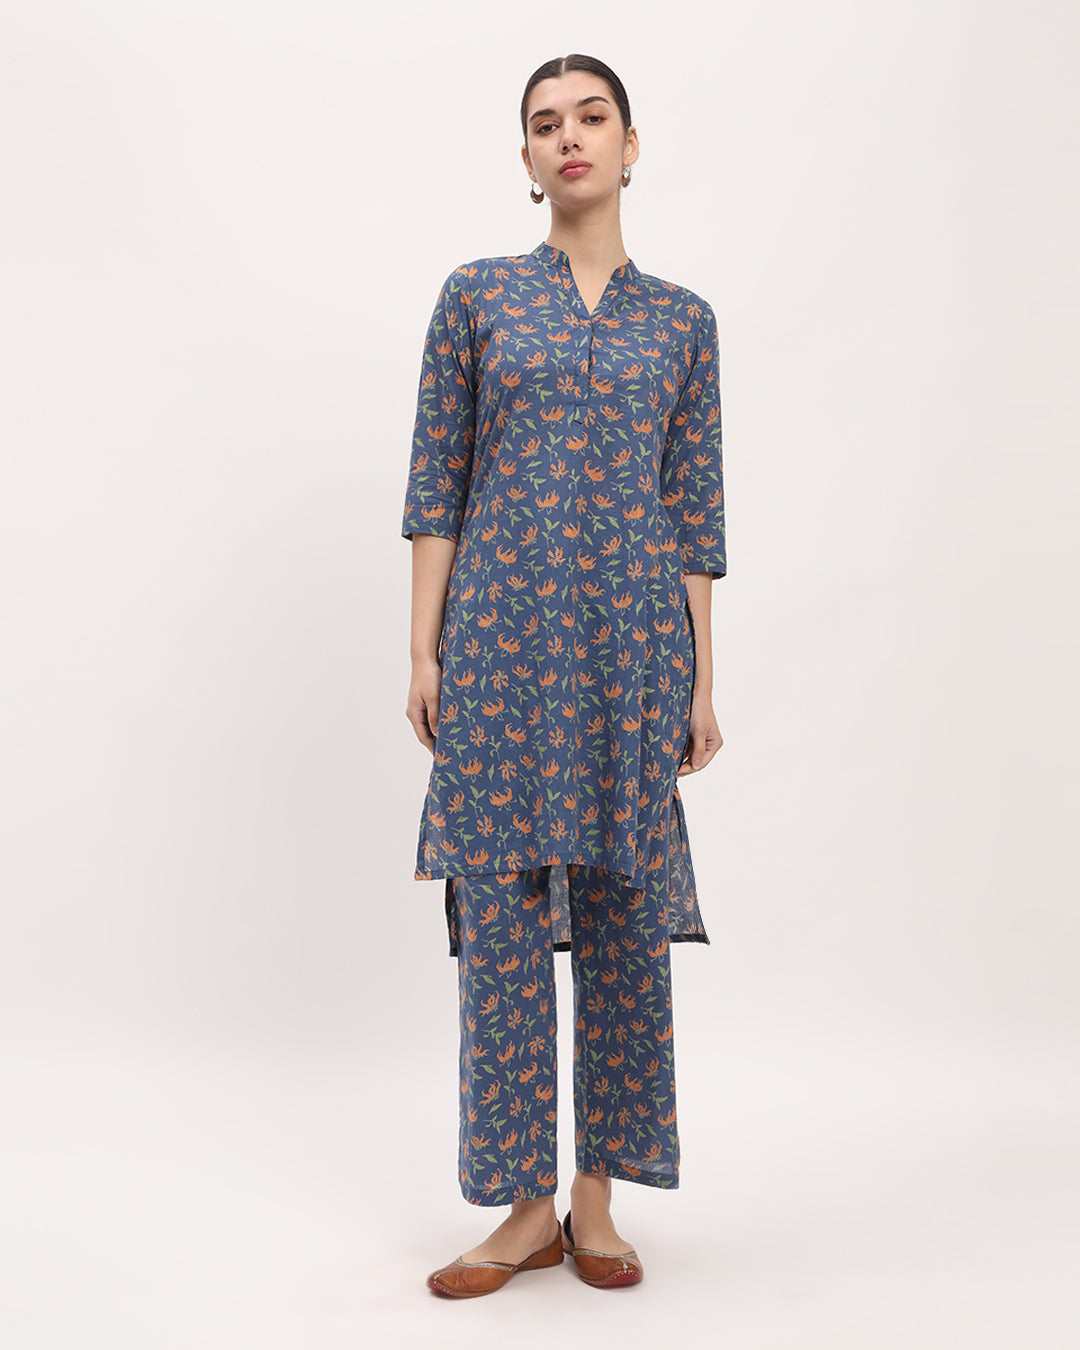 Combo: Lavender Paisley & Fire Lillies High-Low Printed Kurta (Without Bottoms)